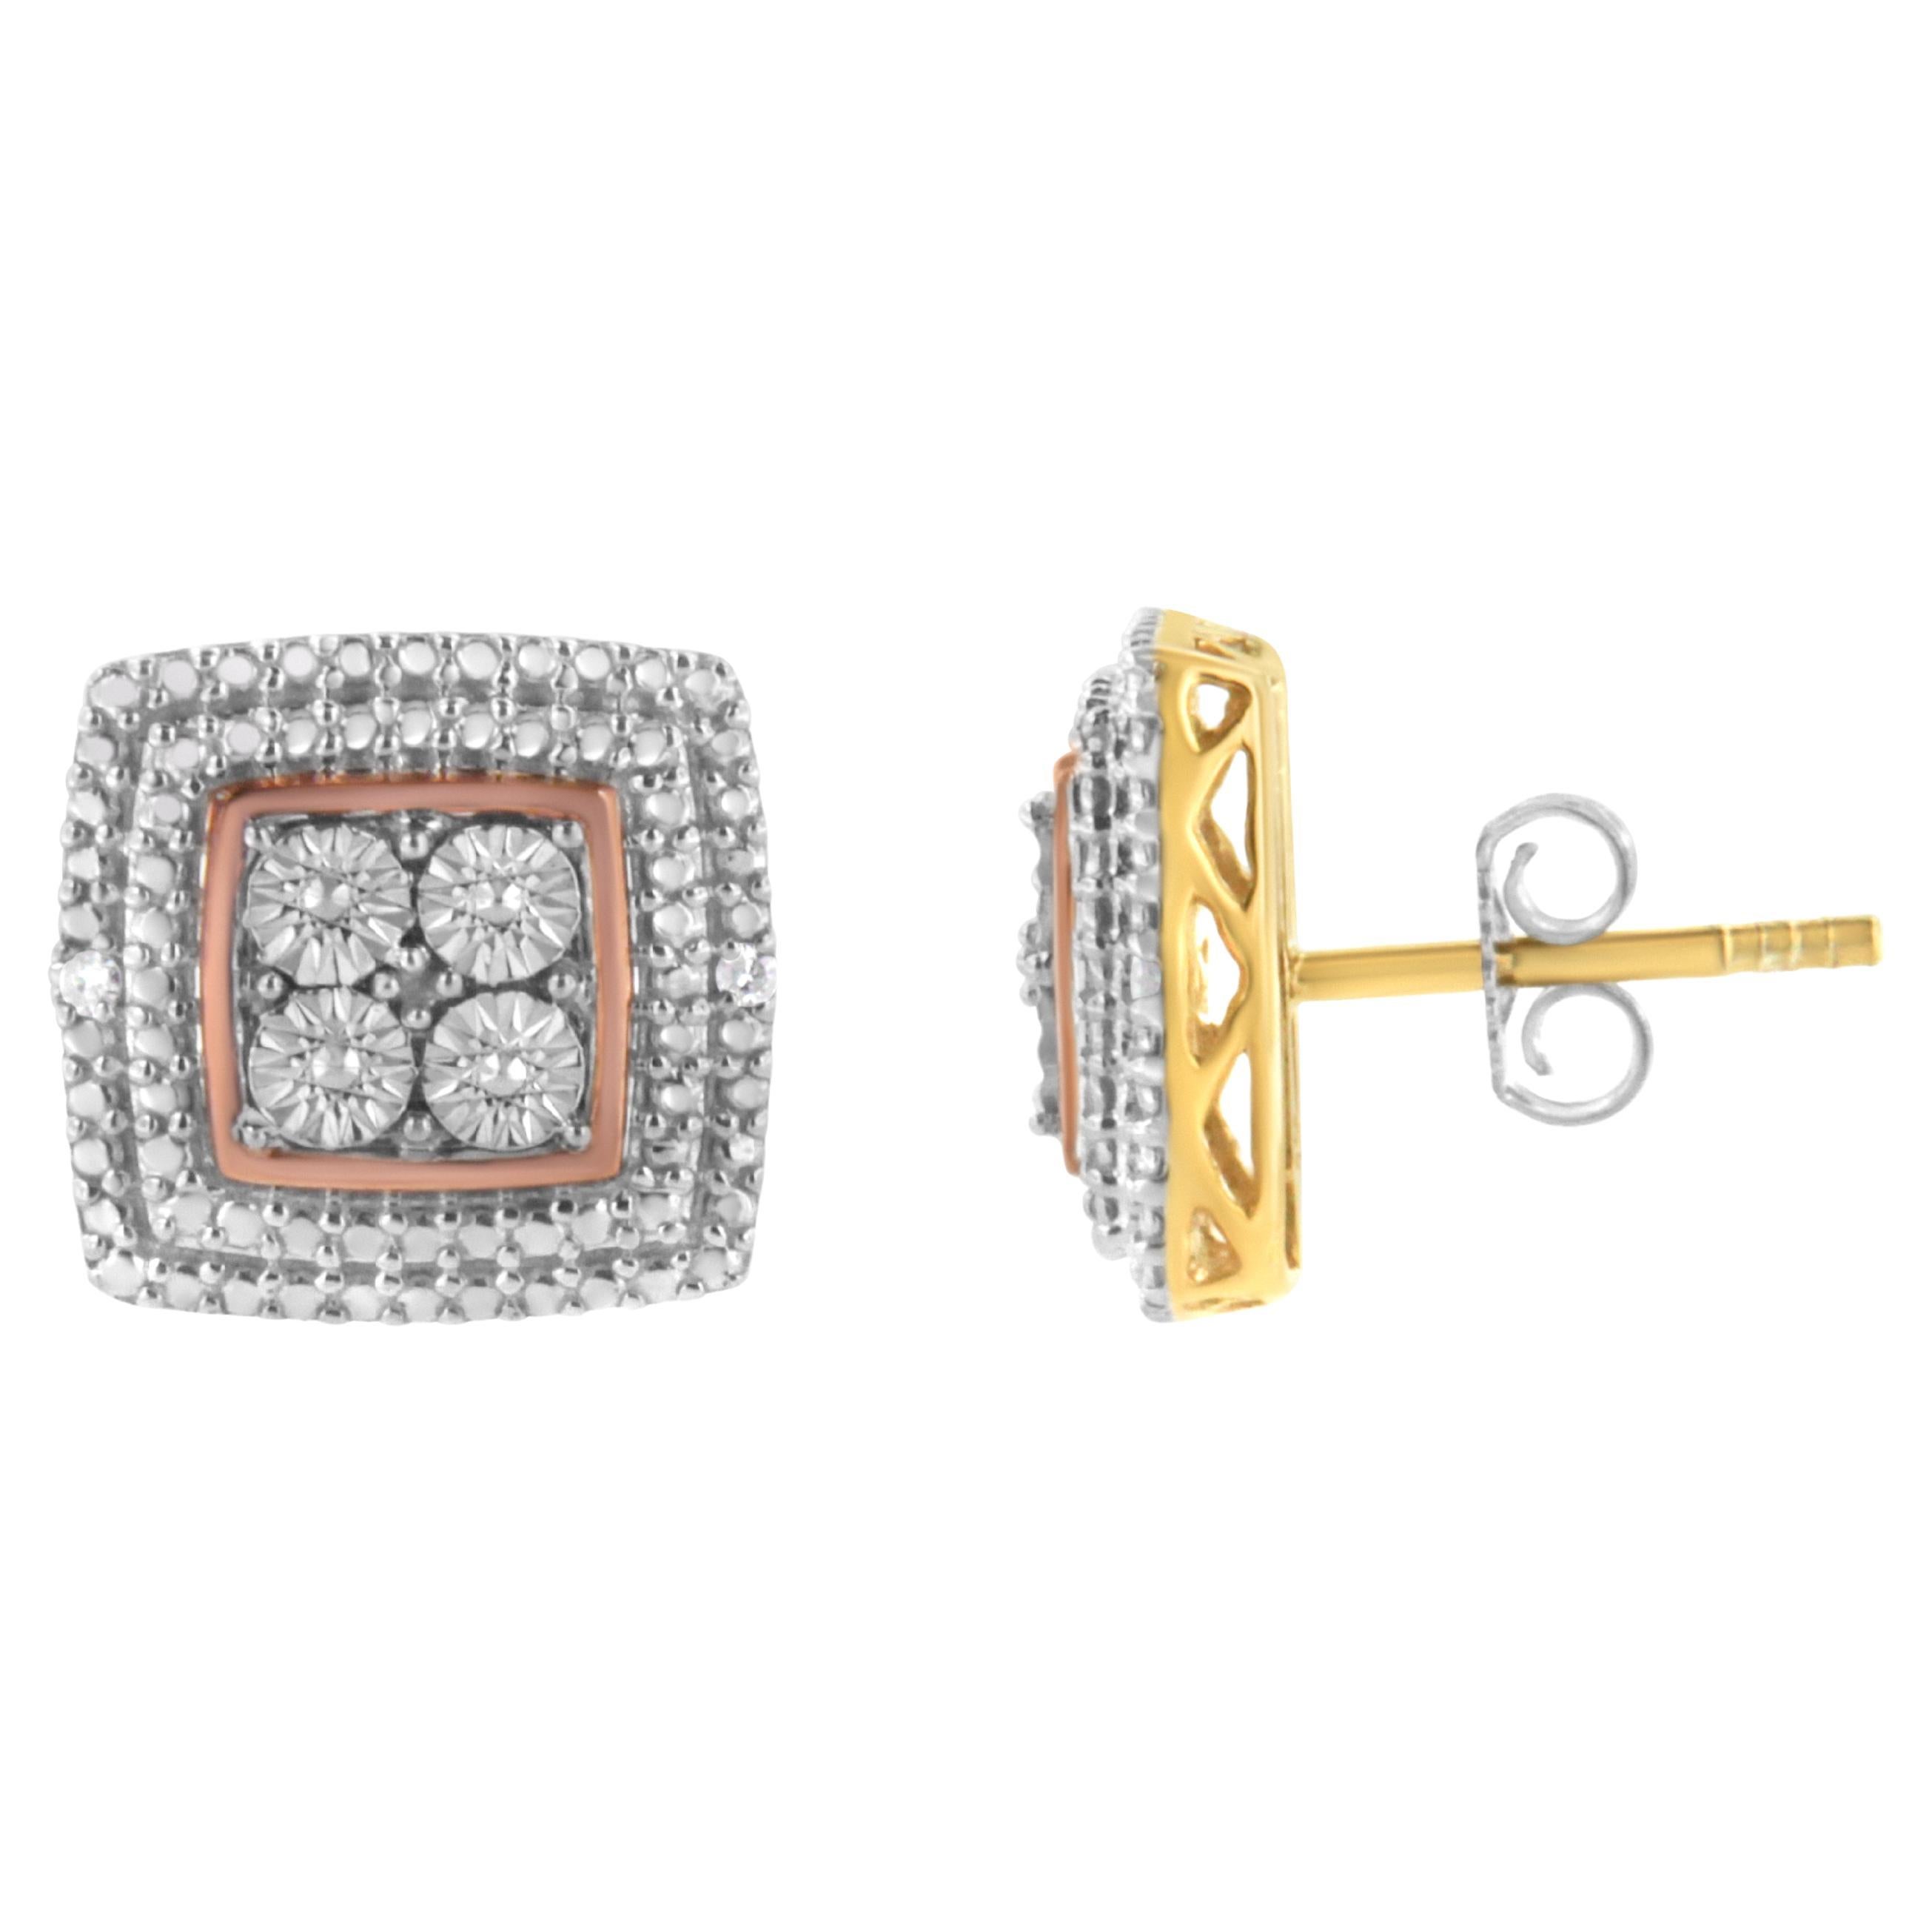 10K Yellow, White, and Rose Gold over Silver Diamond Accent Stud Earrings